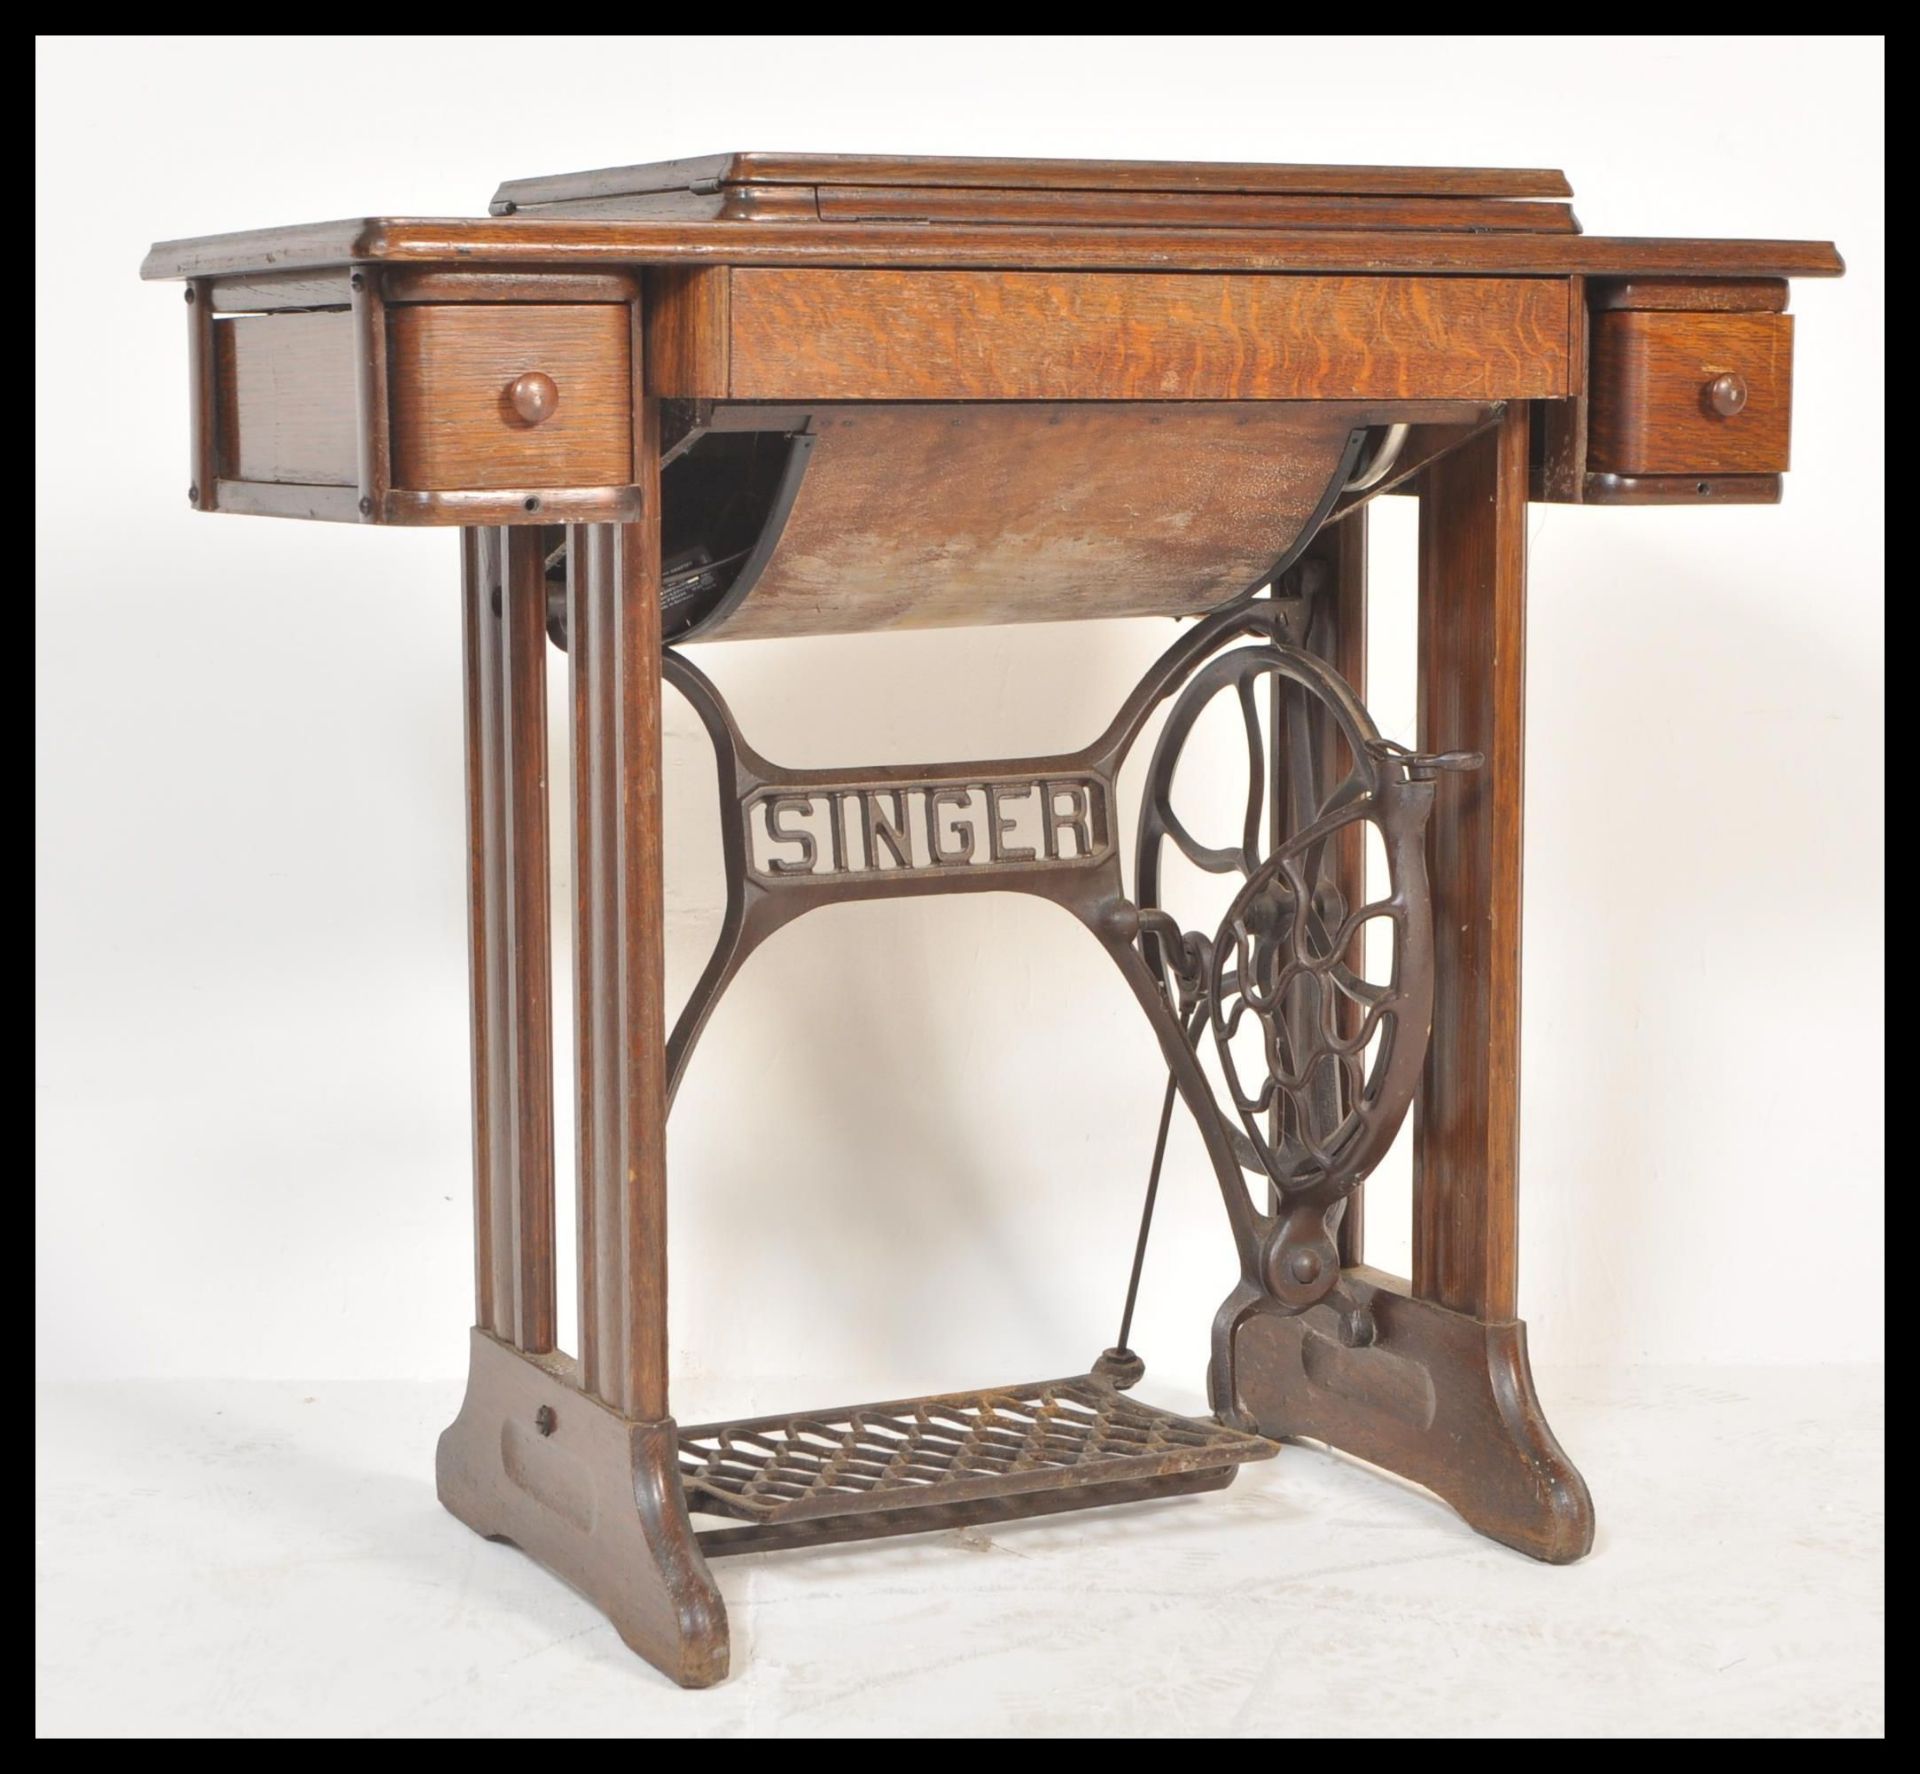 A 1930's Art Deco oak Singer sewing machine table. The electric Singer machine set to a stunning